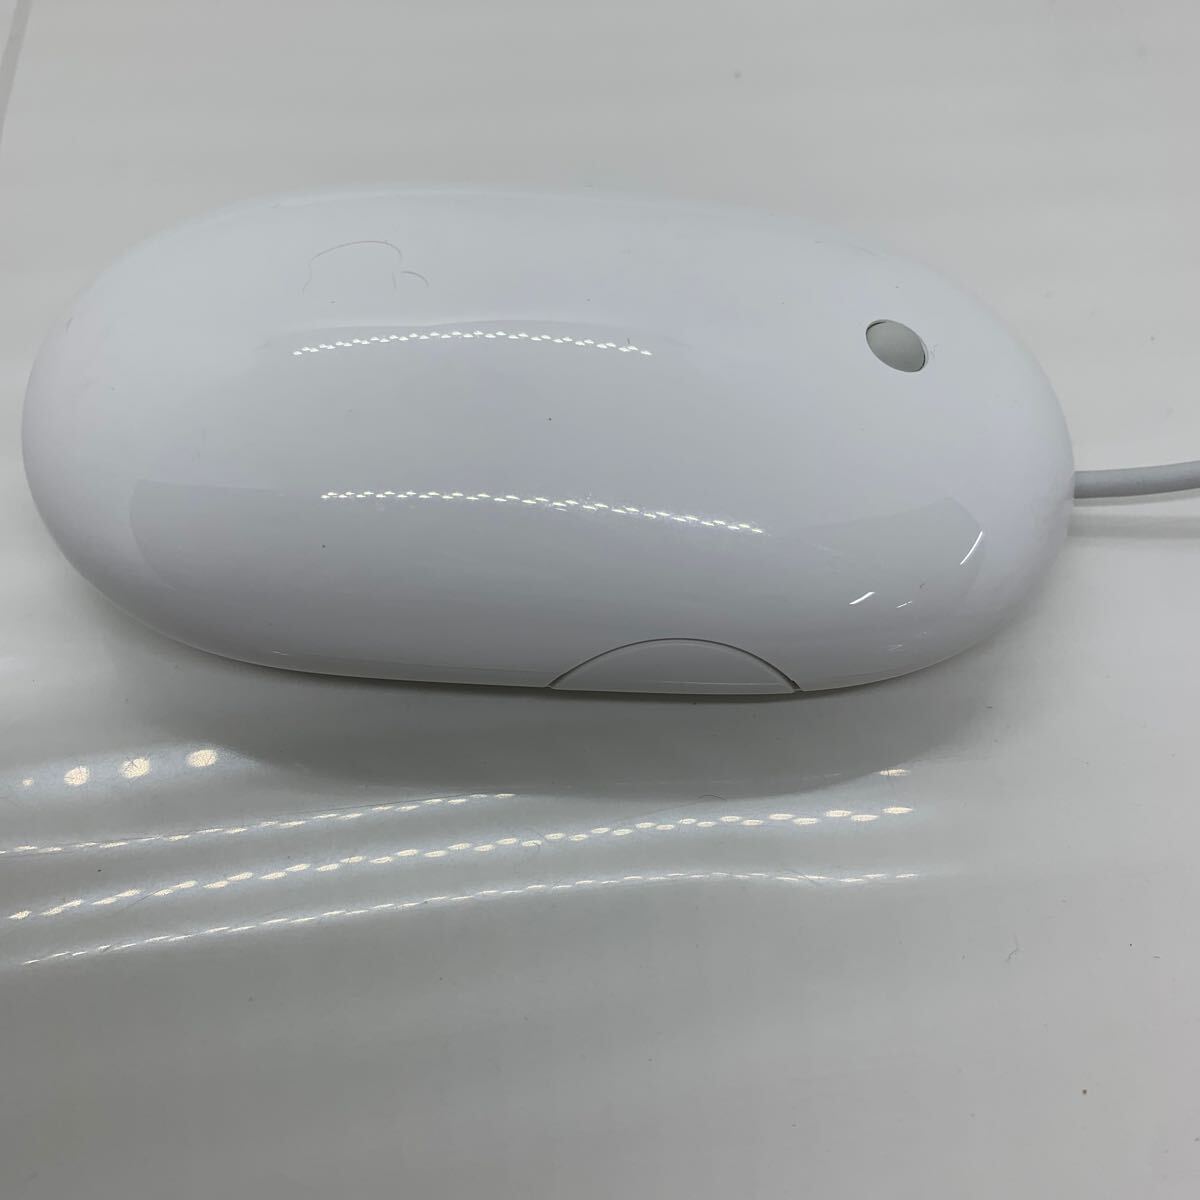 (513-15) secondhand goods Apple USB Mighty Mouse model:A1152